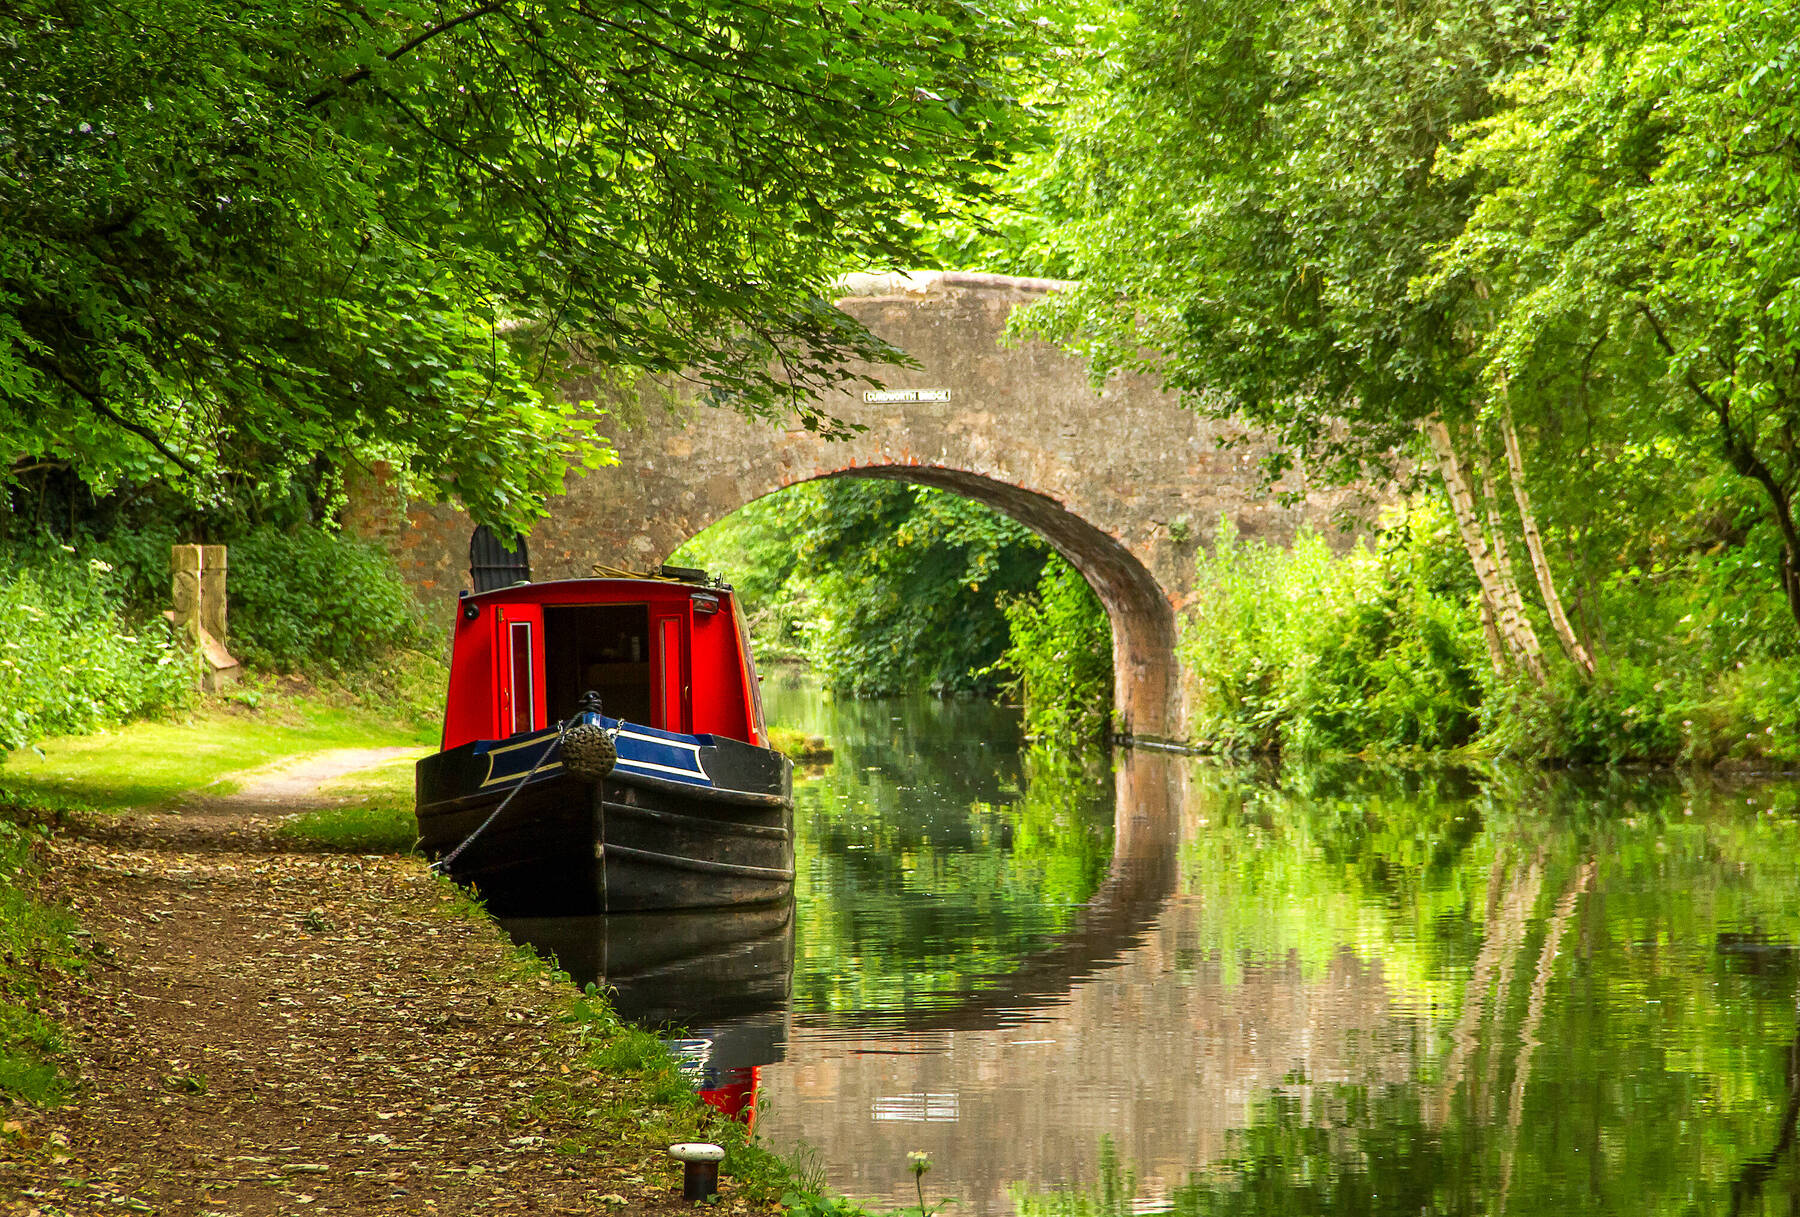 Slow down and relax with a narrowboat cruise